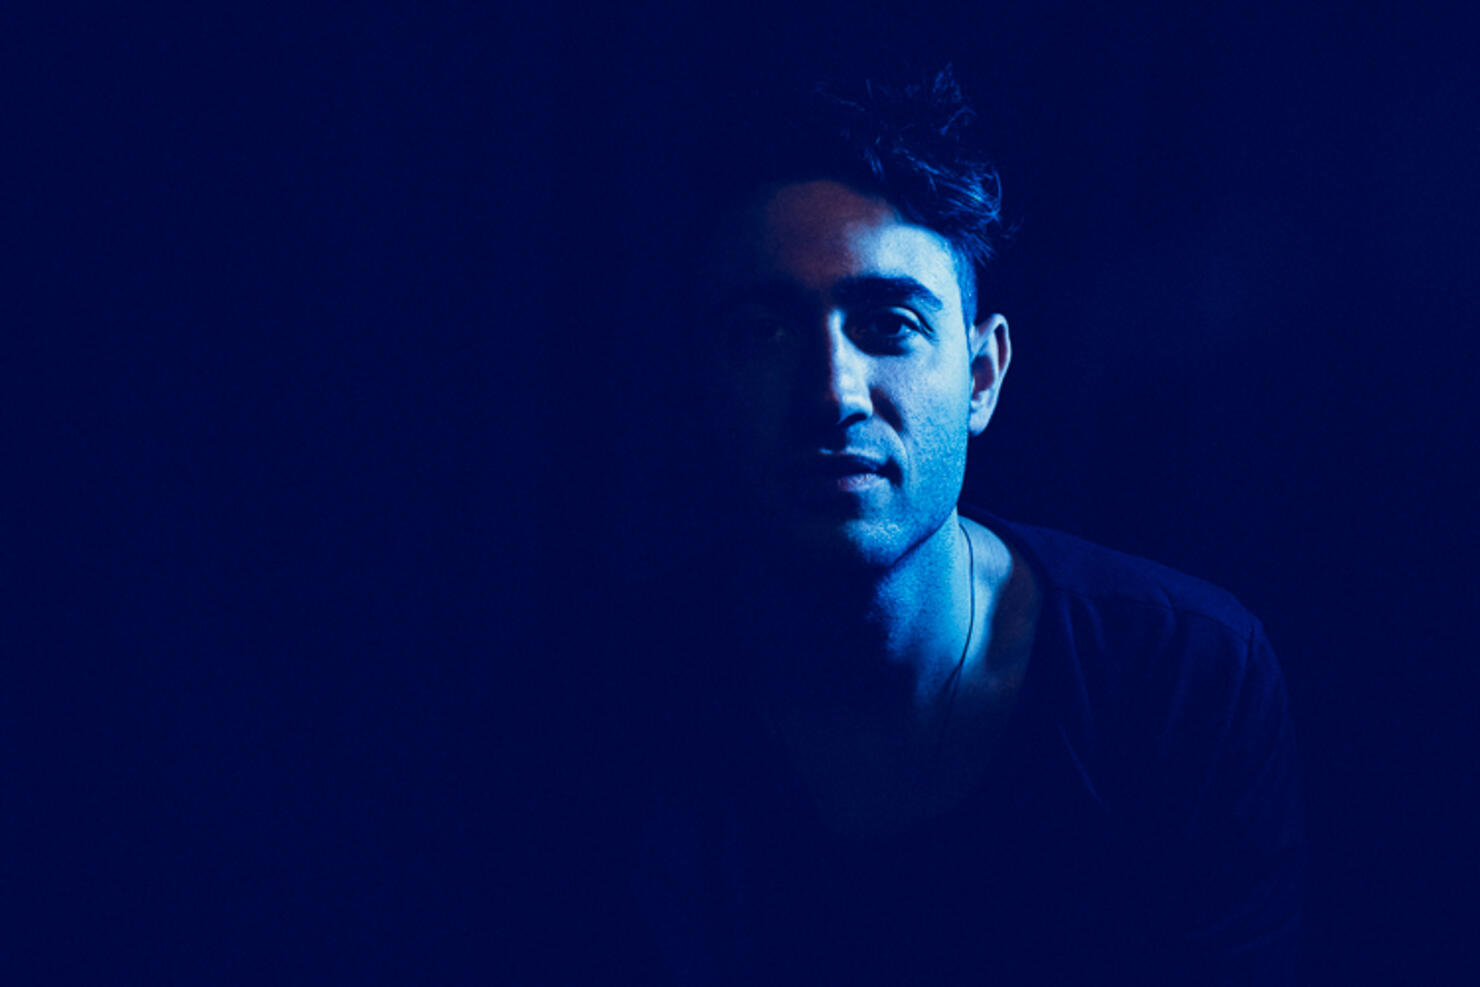 3LAU Interview with iHeartRadio